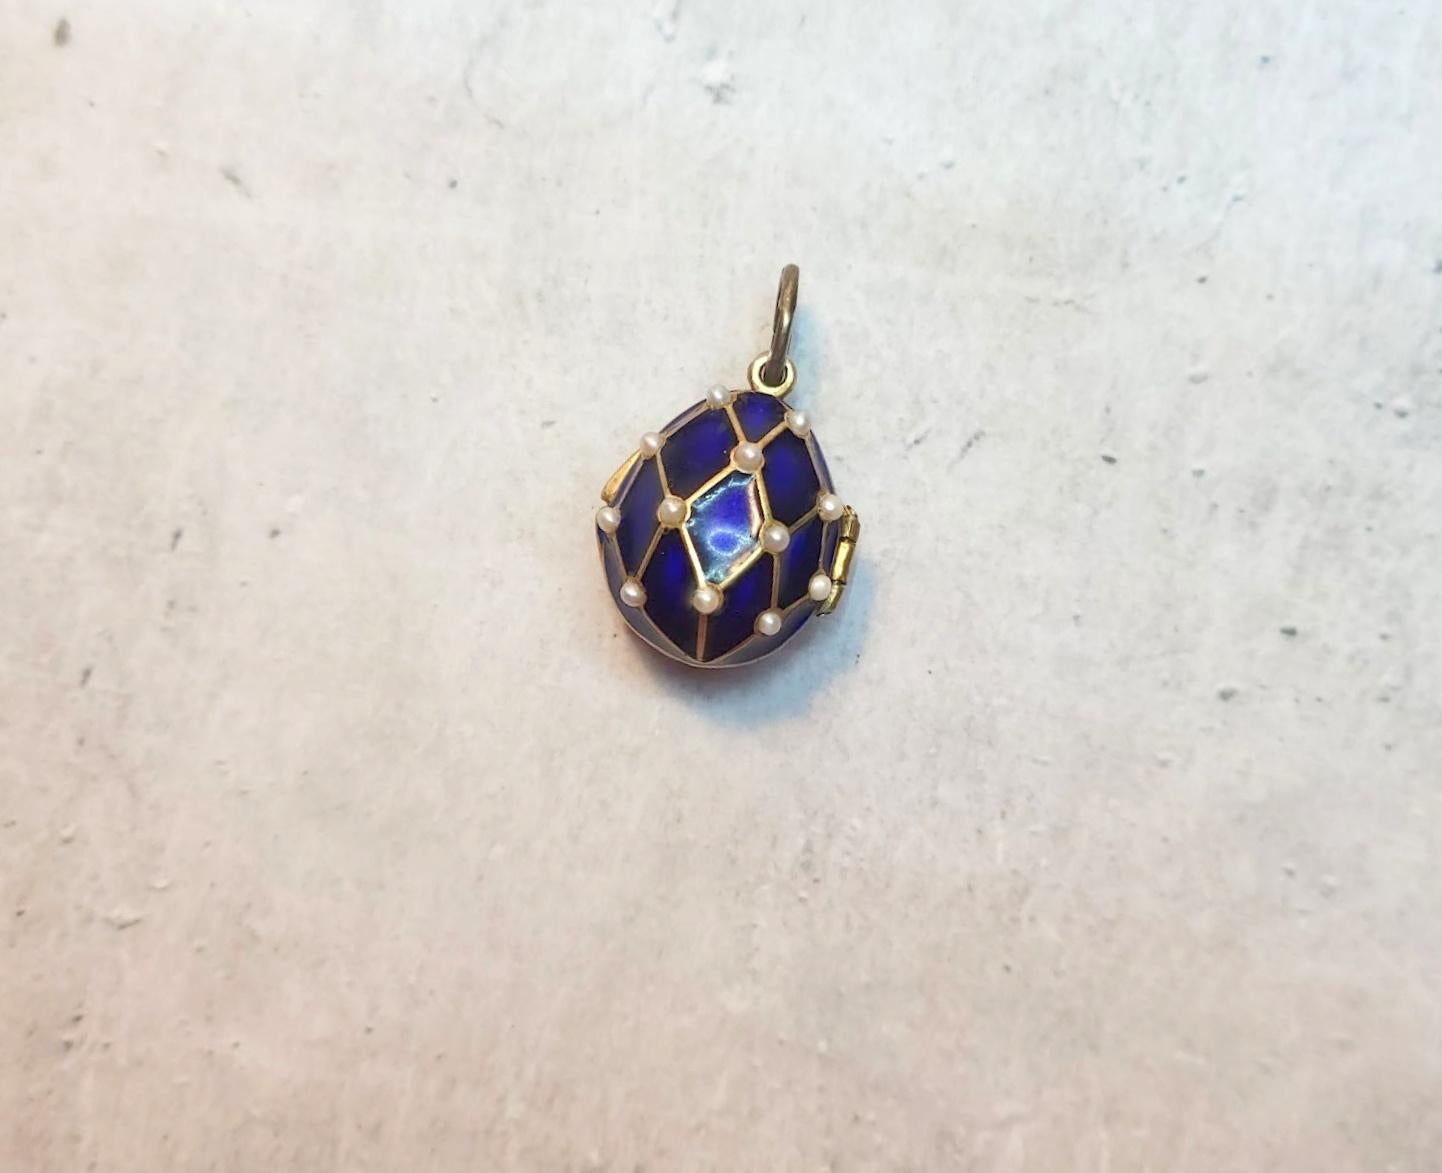 Presenting a stunning pendant designed in the shape of a Russian Imperial 88 gilt silver and enamel egg. This exquisite piece showcases a relief image of the cobalt mesh with natural pearls adorned with gold and Guilloche blue enamel. The loop on